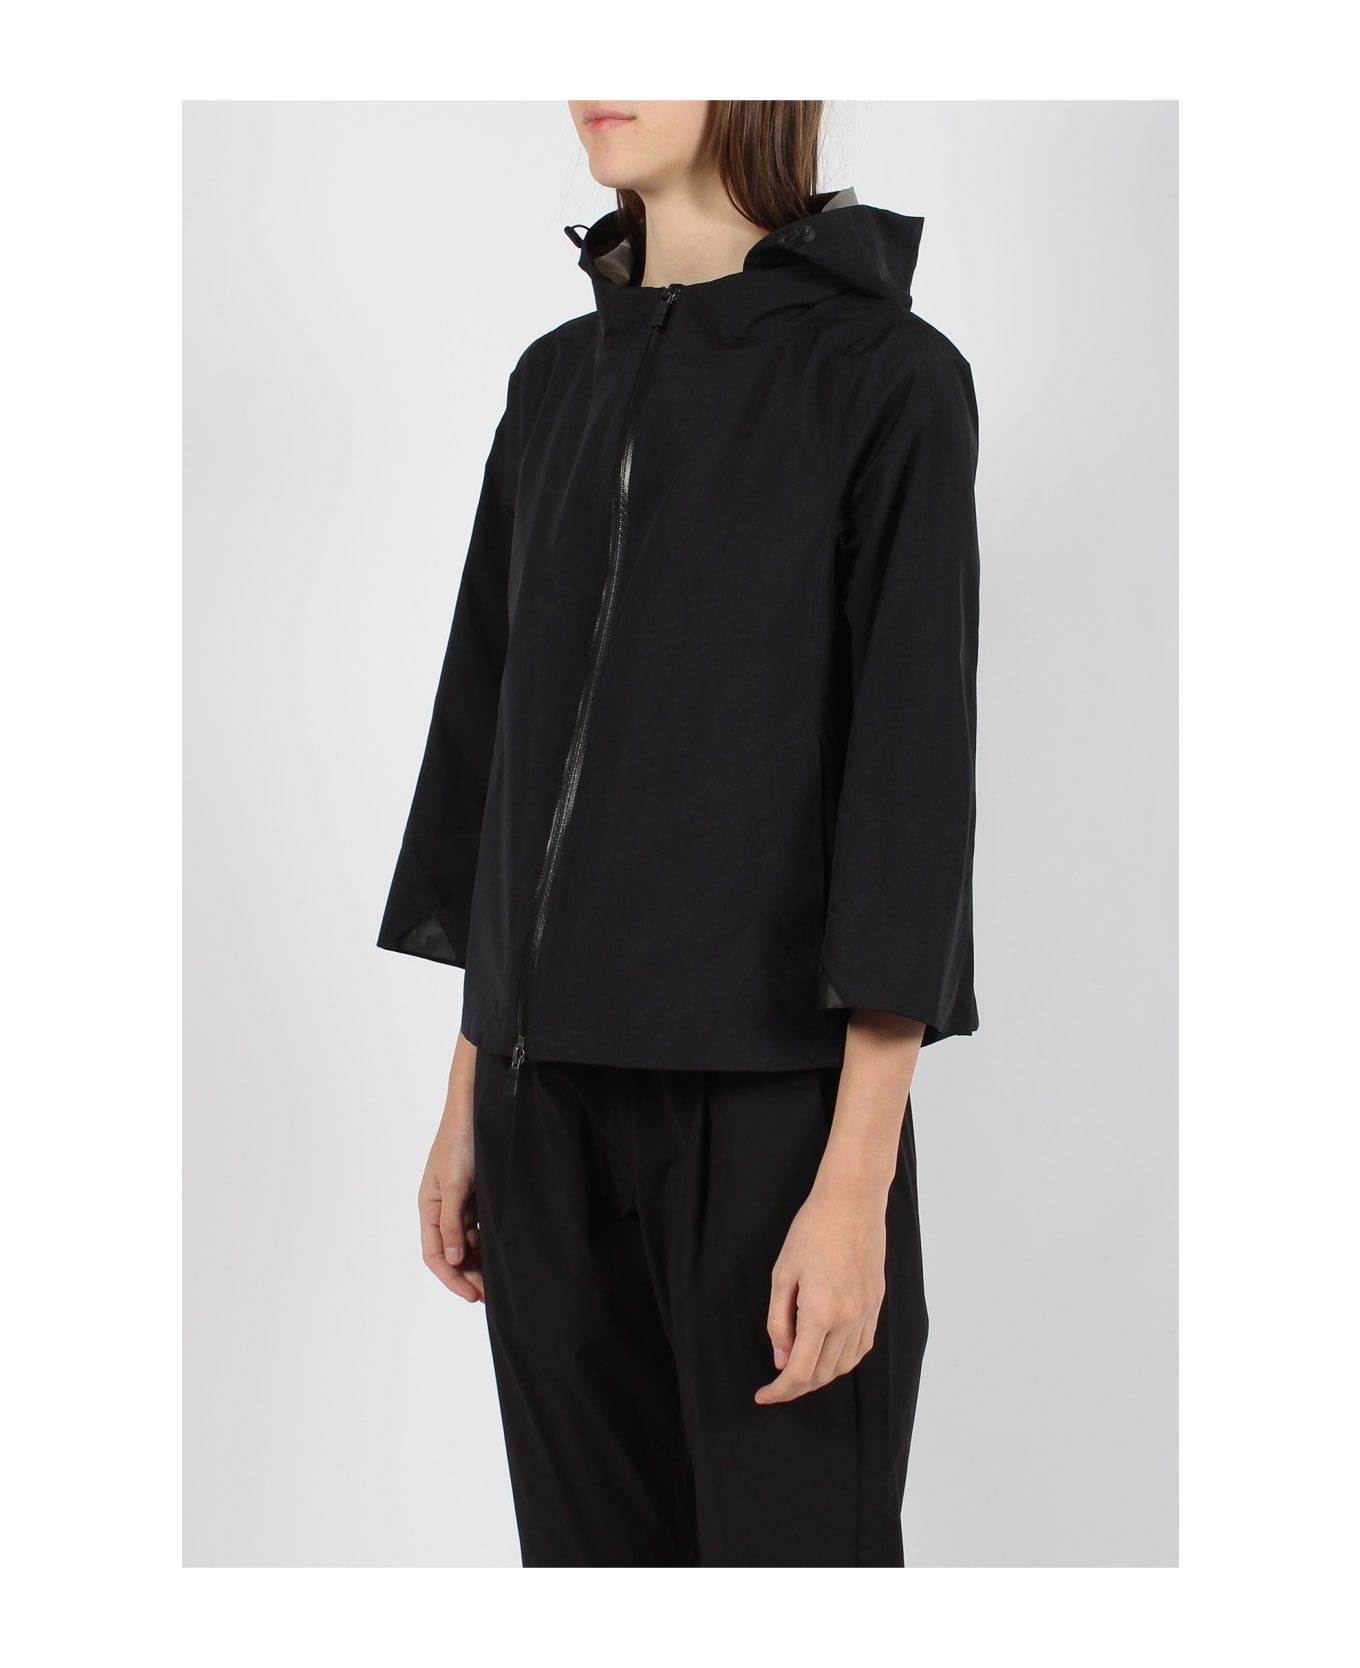 Herno Hooded Cape - Black